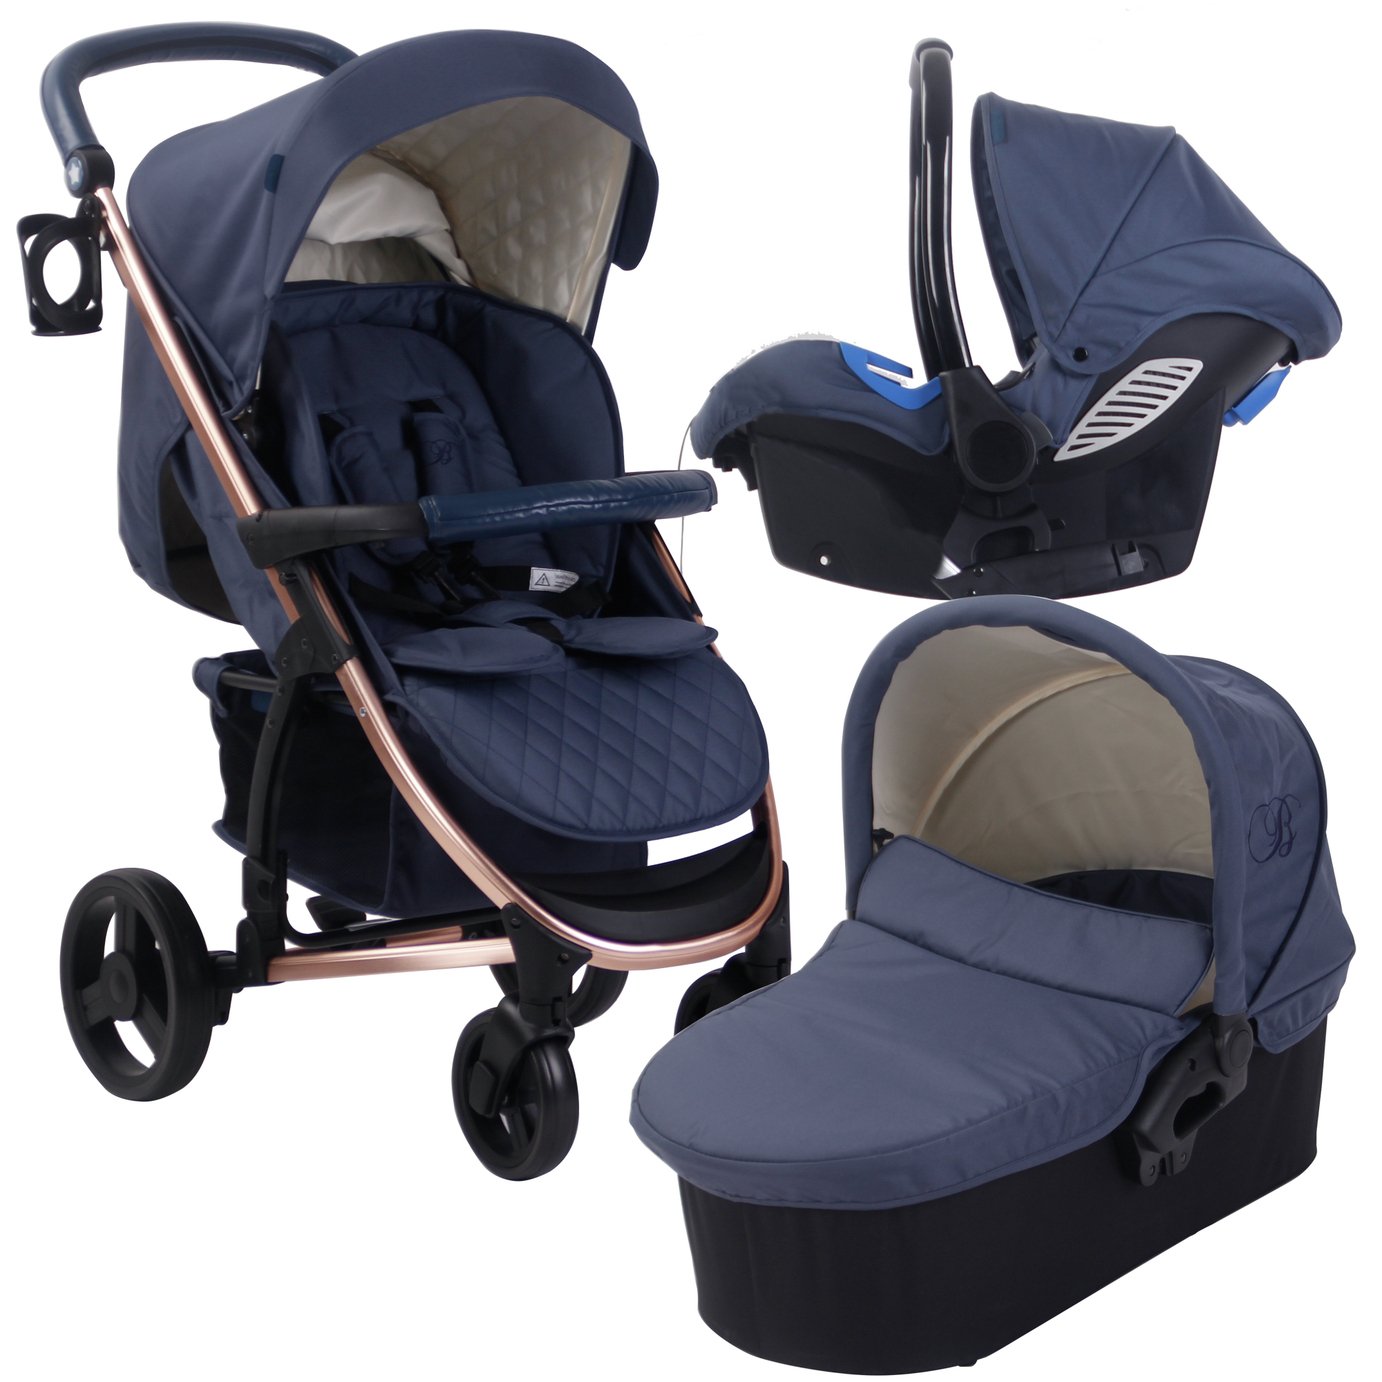 My Babiie Billie Faiers MB200 Travel System - Rose Navy